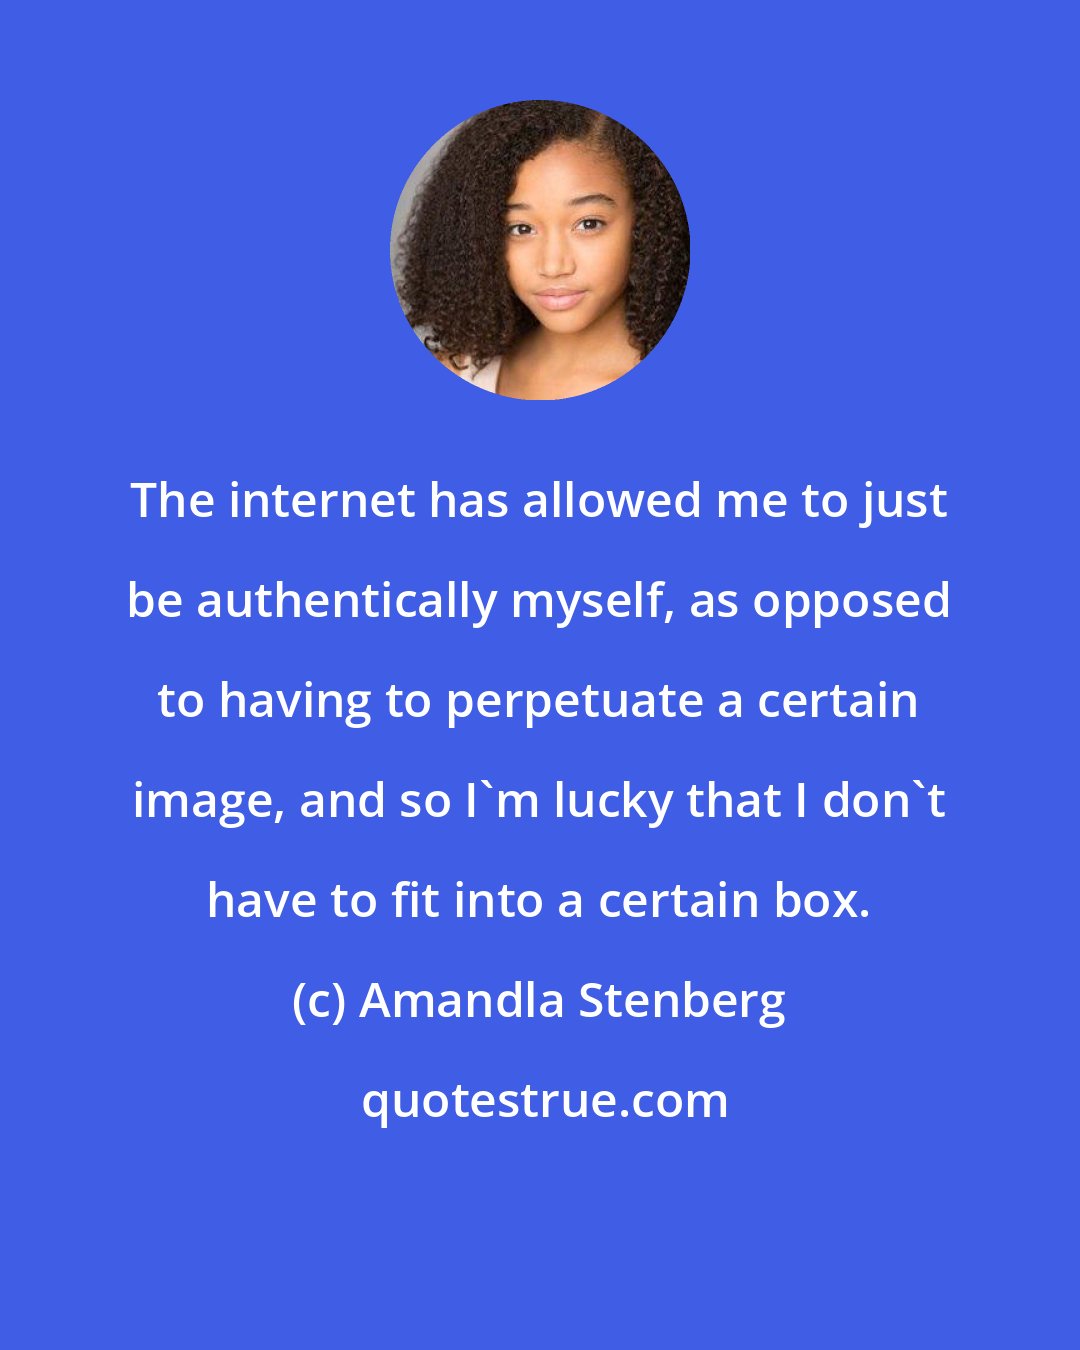 Amandla Stenberg: The internet has allowed me to just be authentically myself, as opposed to having to perpetuate a certain image, and so I'm lucky that I don't have to fit into a certain box.